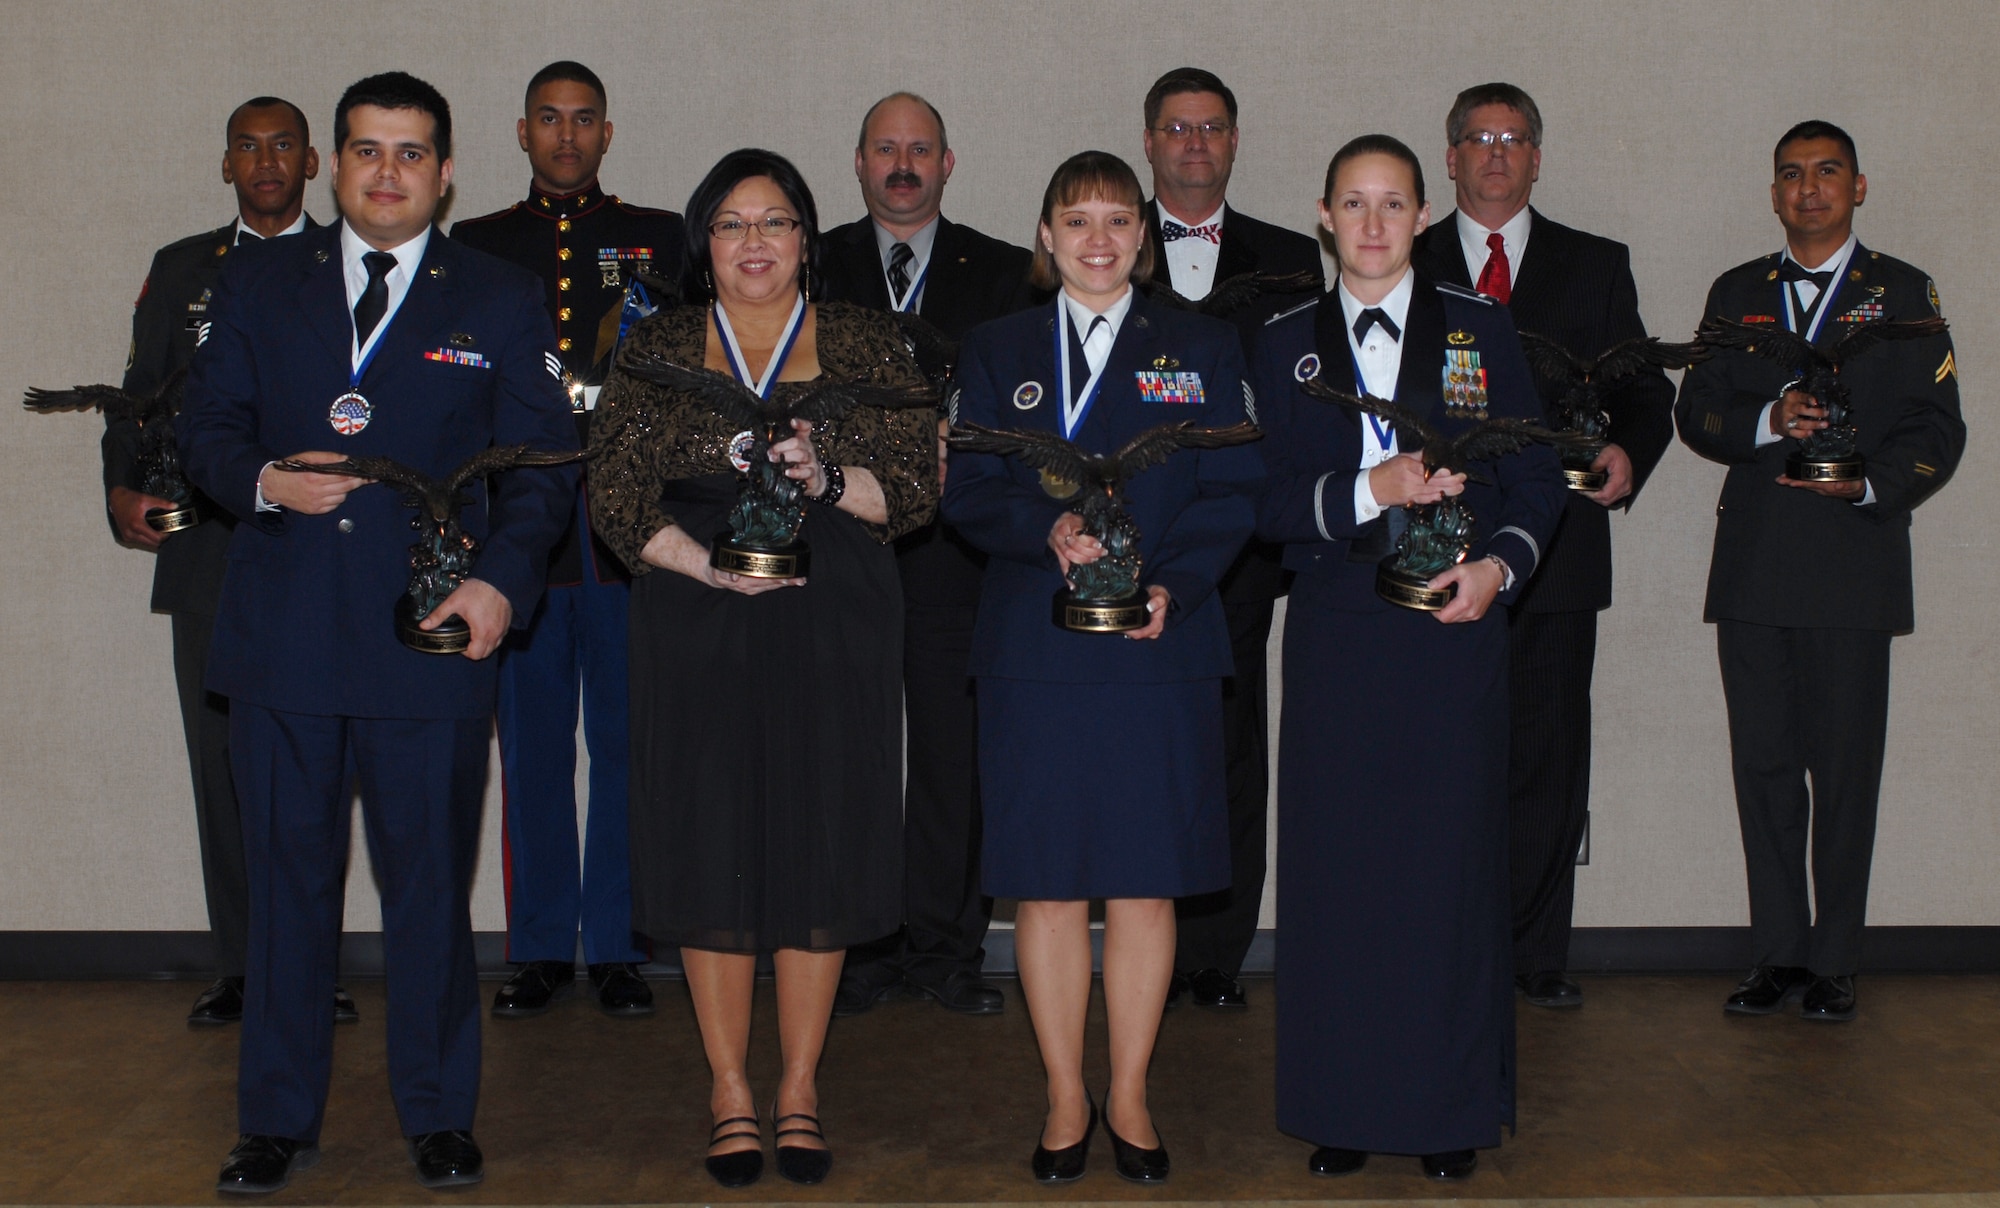 SAN ANGELO, Texas -- Goodfellow Air Force Base recognizes its annual award winners during the GAFB 2009 Annual Awards Banquet, Feb. 2, 2010. More than 350 people attended the banquet that recognized 49 individual nominees. (U.S. Air Force photo/Staff Sgt. Laura R. McFarlane)
